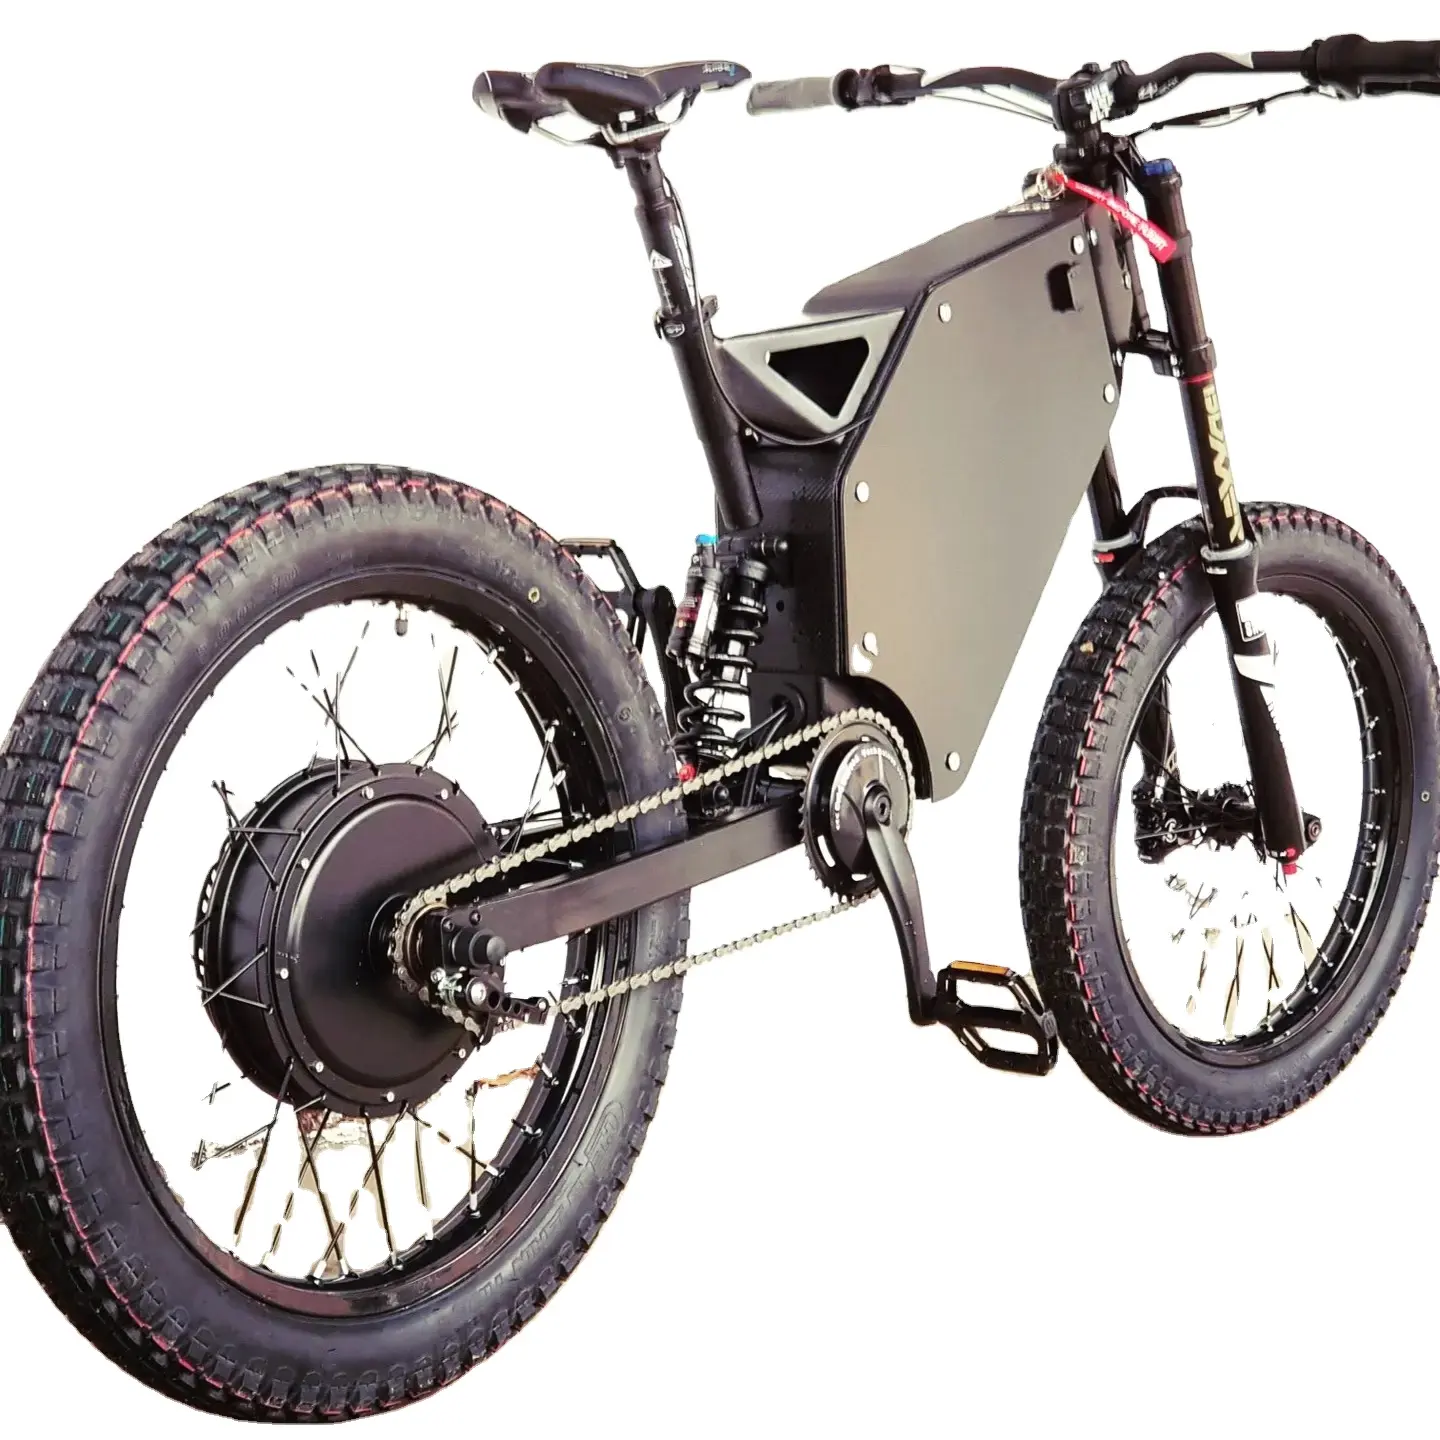 high end newest surron electric dirt bike powerful 72v 3000w electric dirt bike adult off-road motorcycles